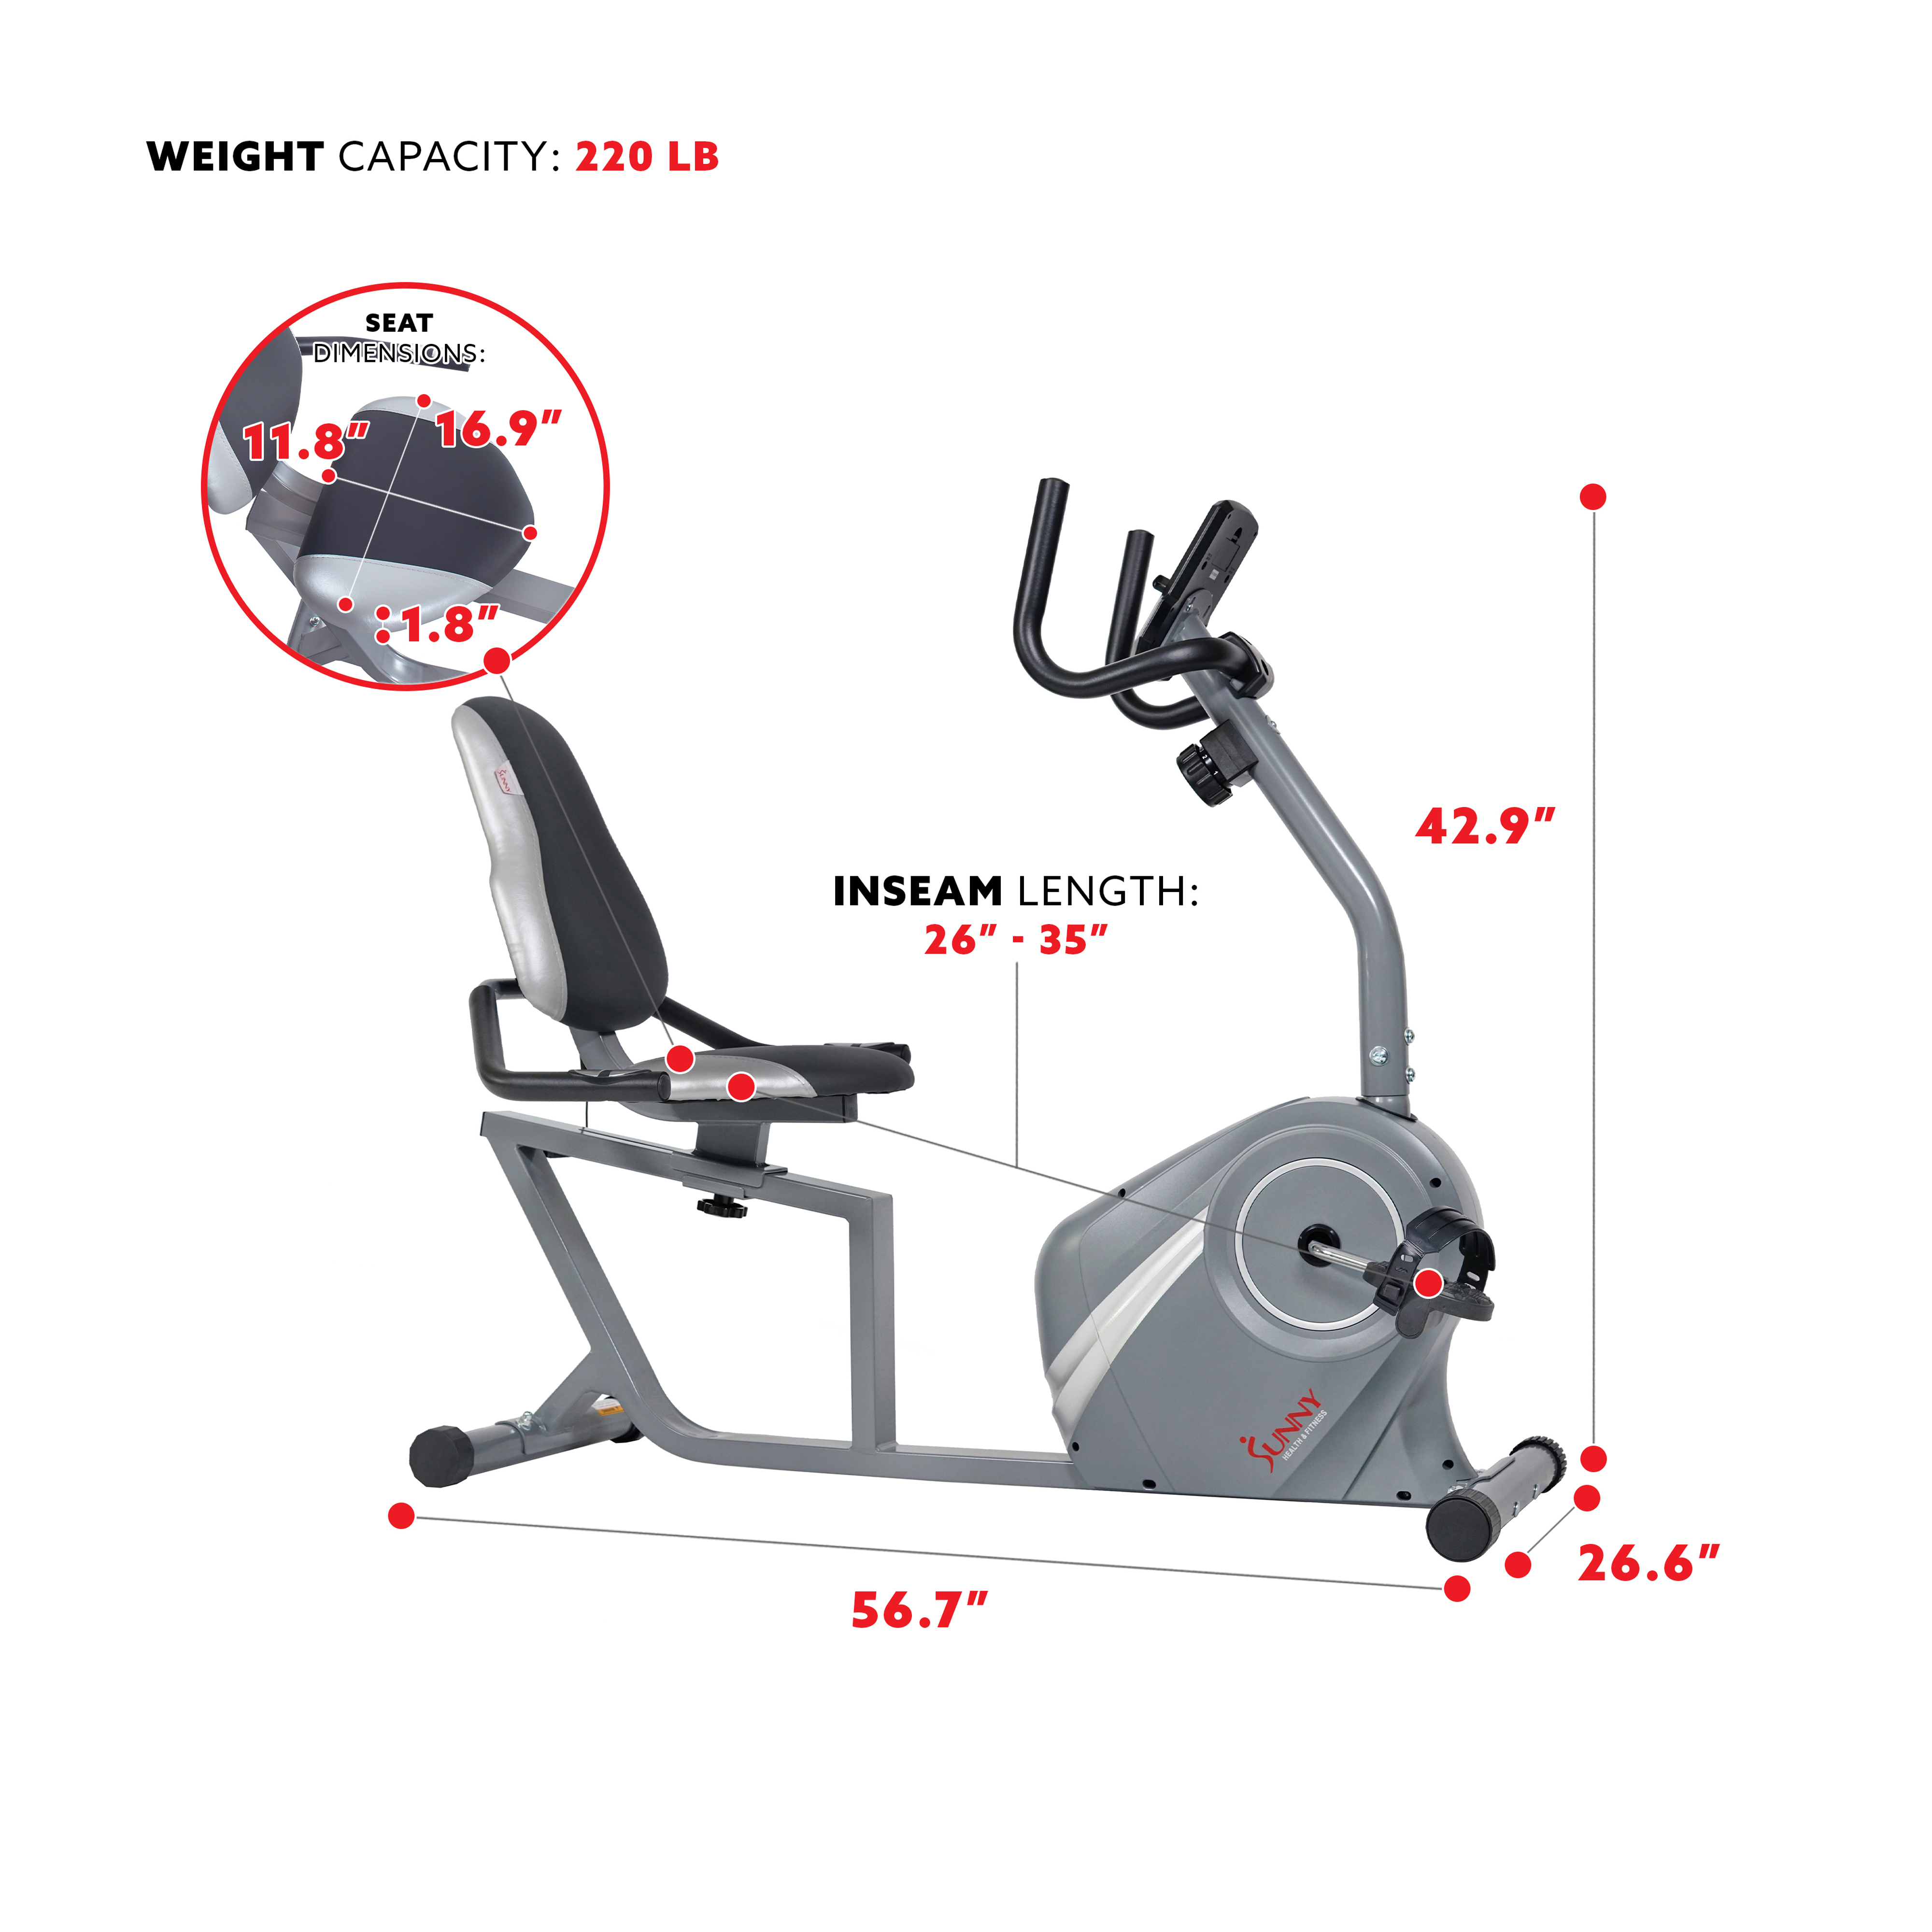 Sunny Health & Fitness Magnetic Recumbent Exercise Bike for Indoor Cardio Training w/ Adjustable Soft Seat Cushion, SF-RB4876 - image 7 of 8